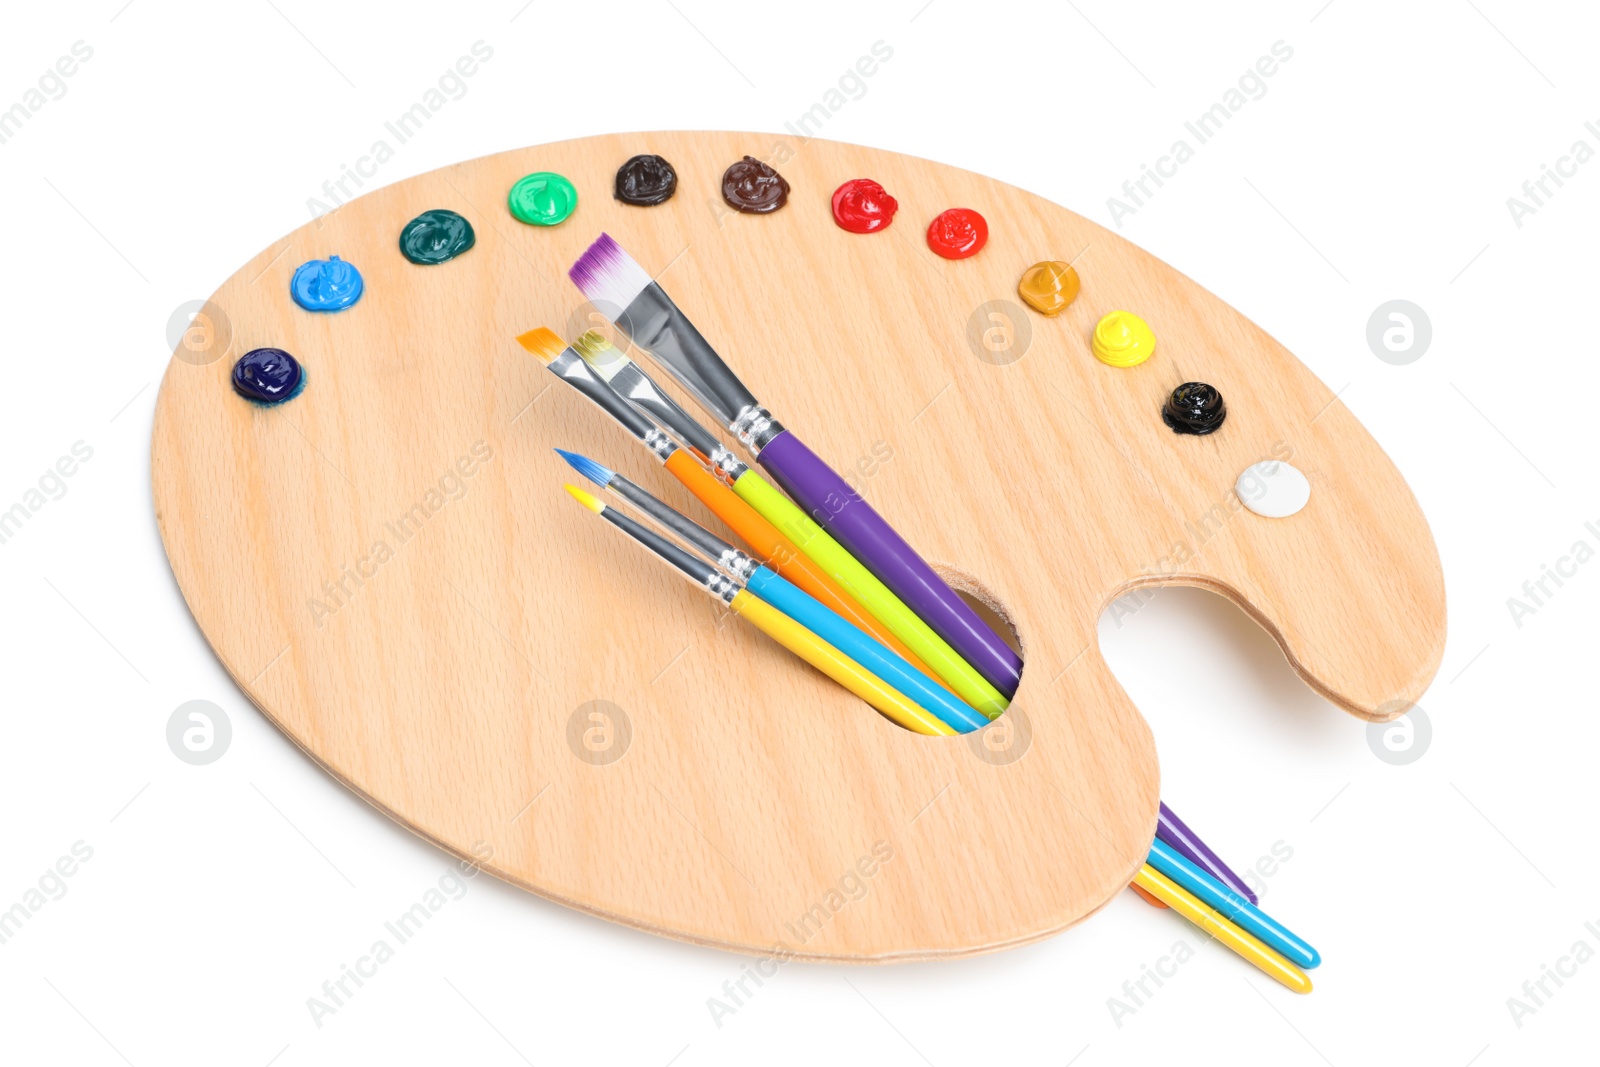 Photo of Palette with paints and brushes on white background. Artist equipment